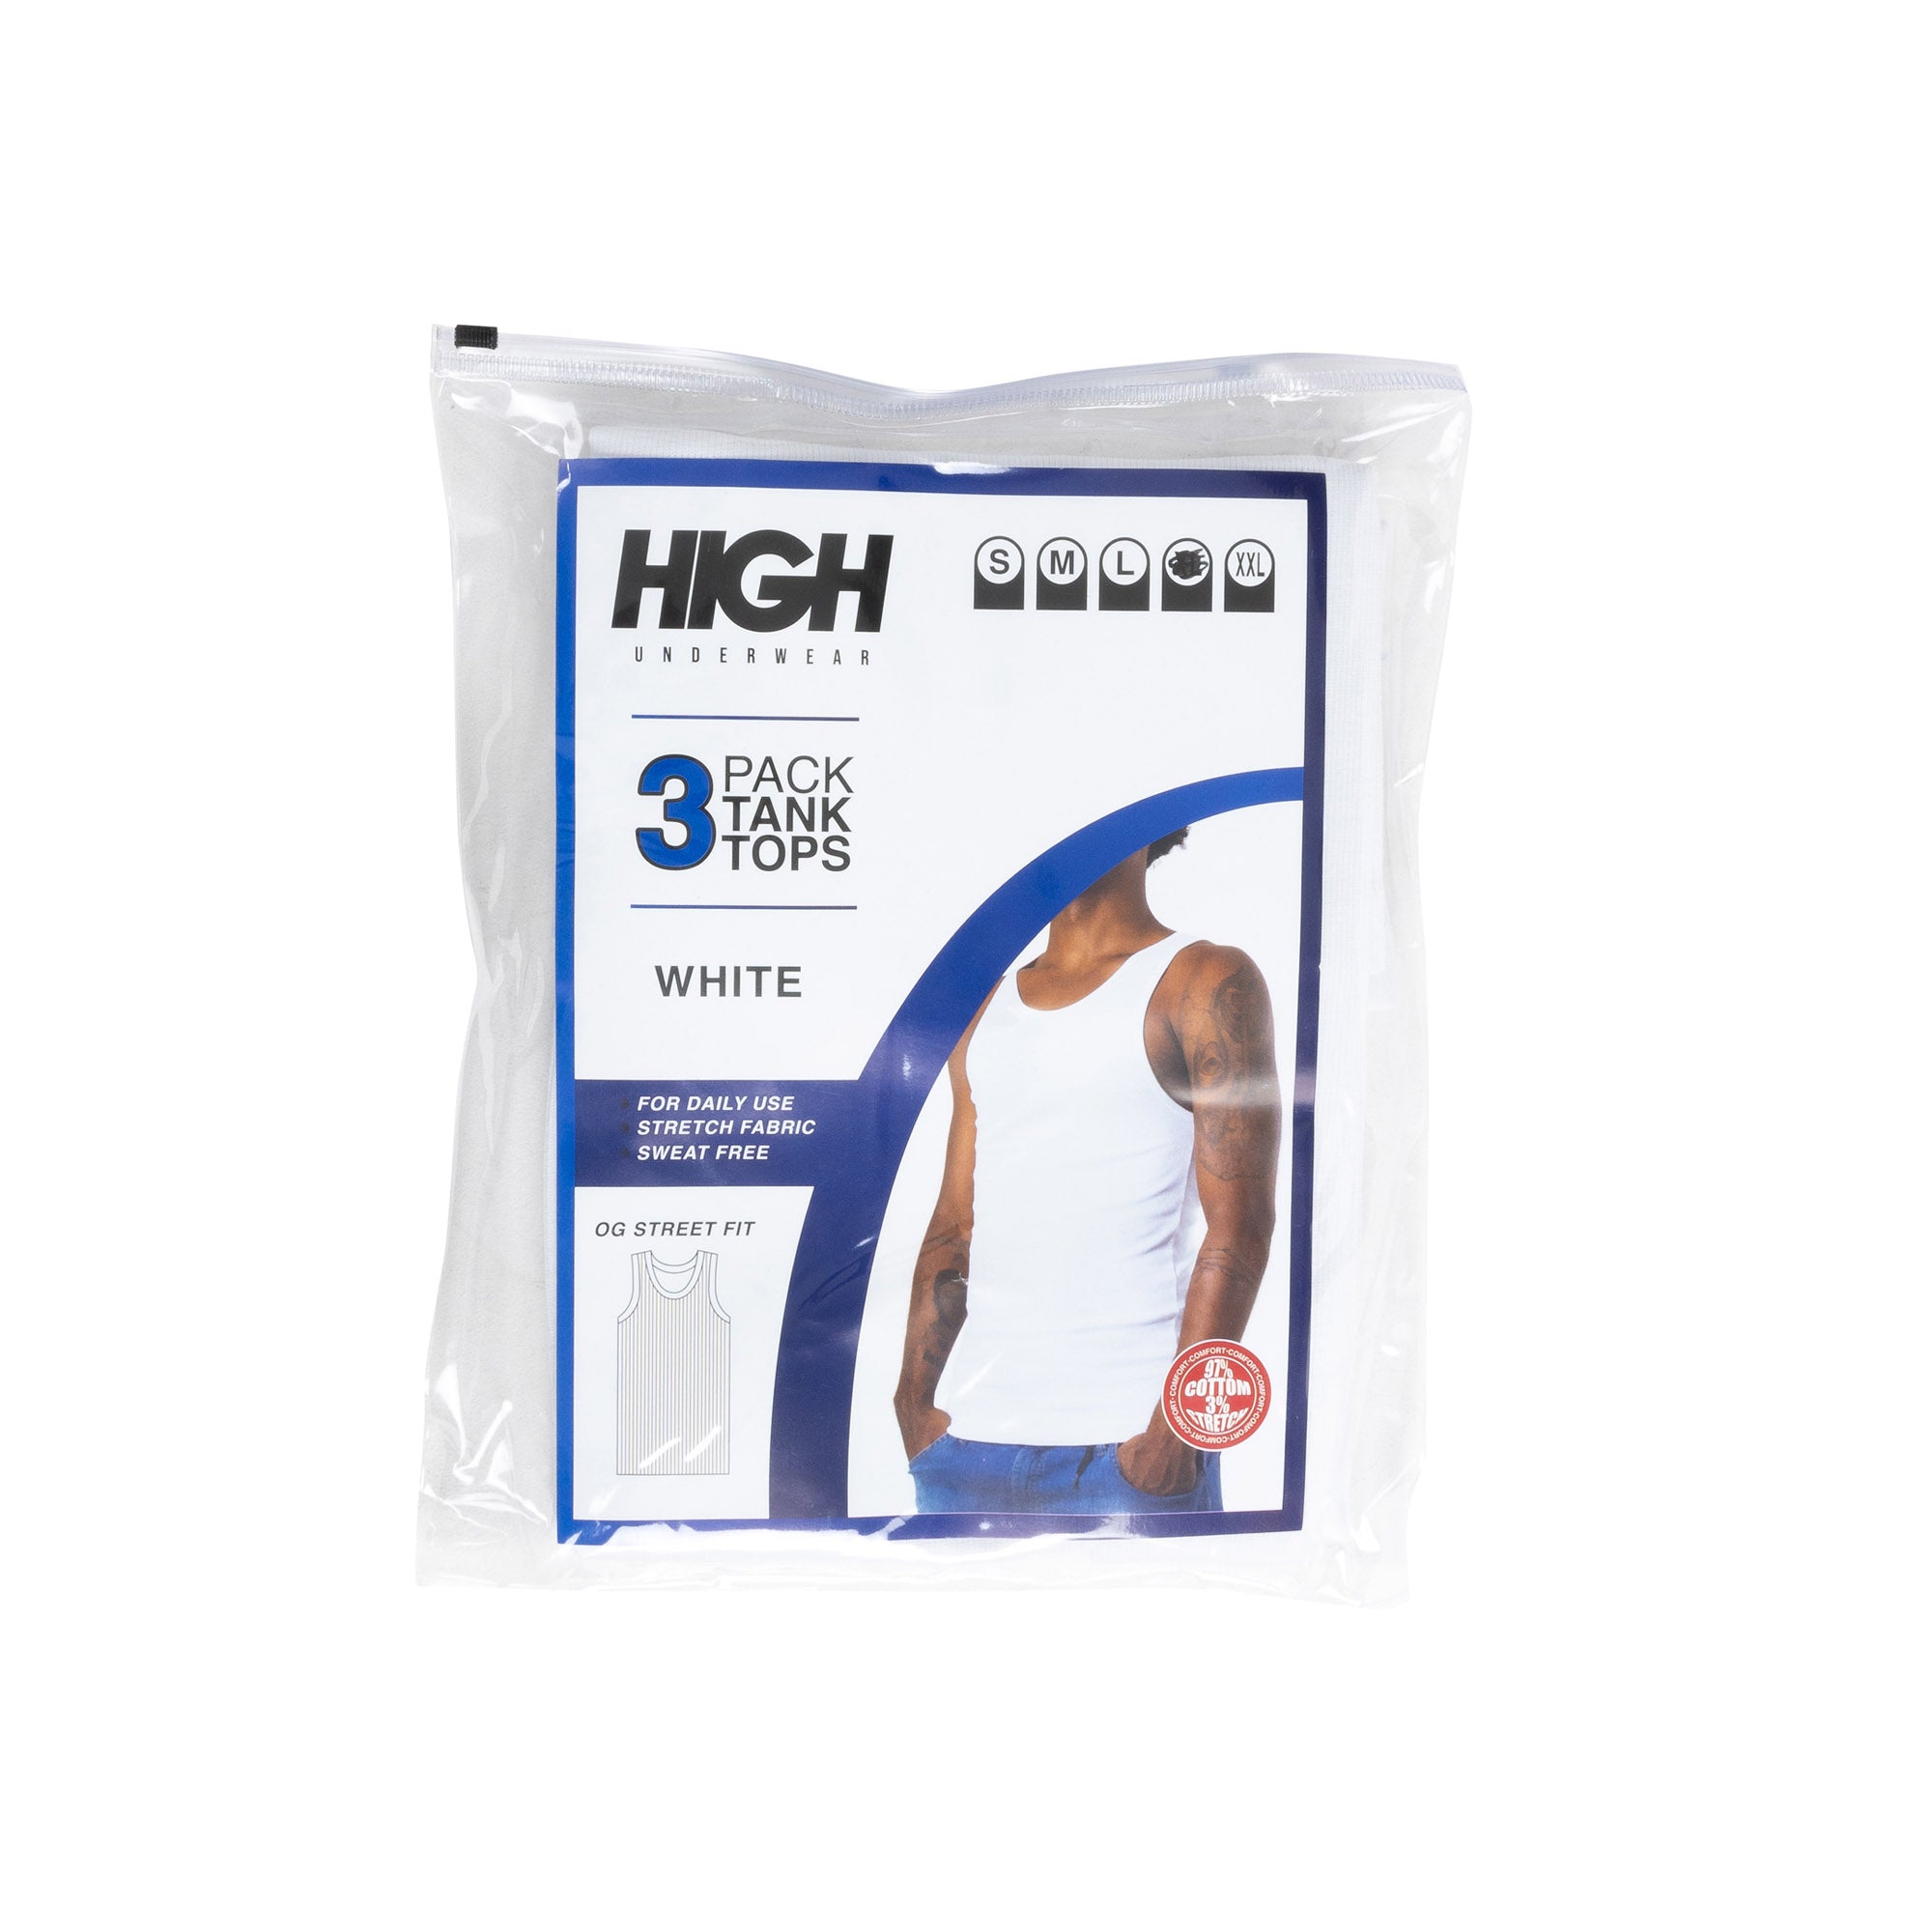 HIGH - Tank Top Pack White - Slow Office